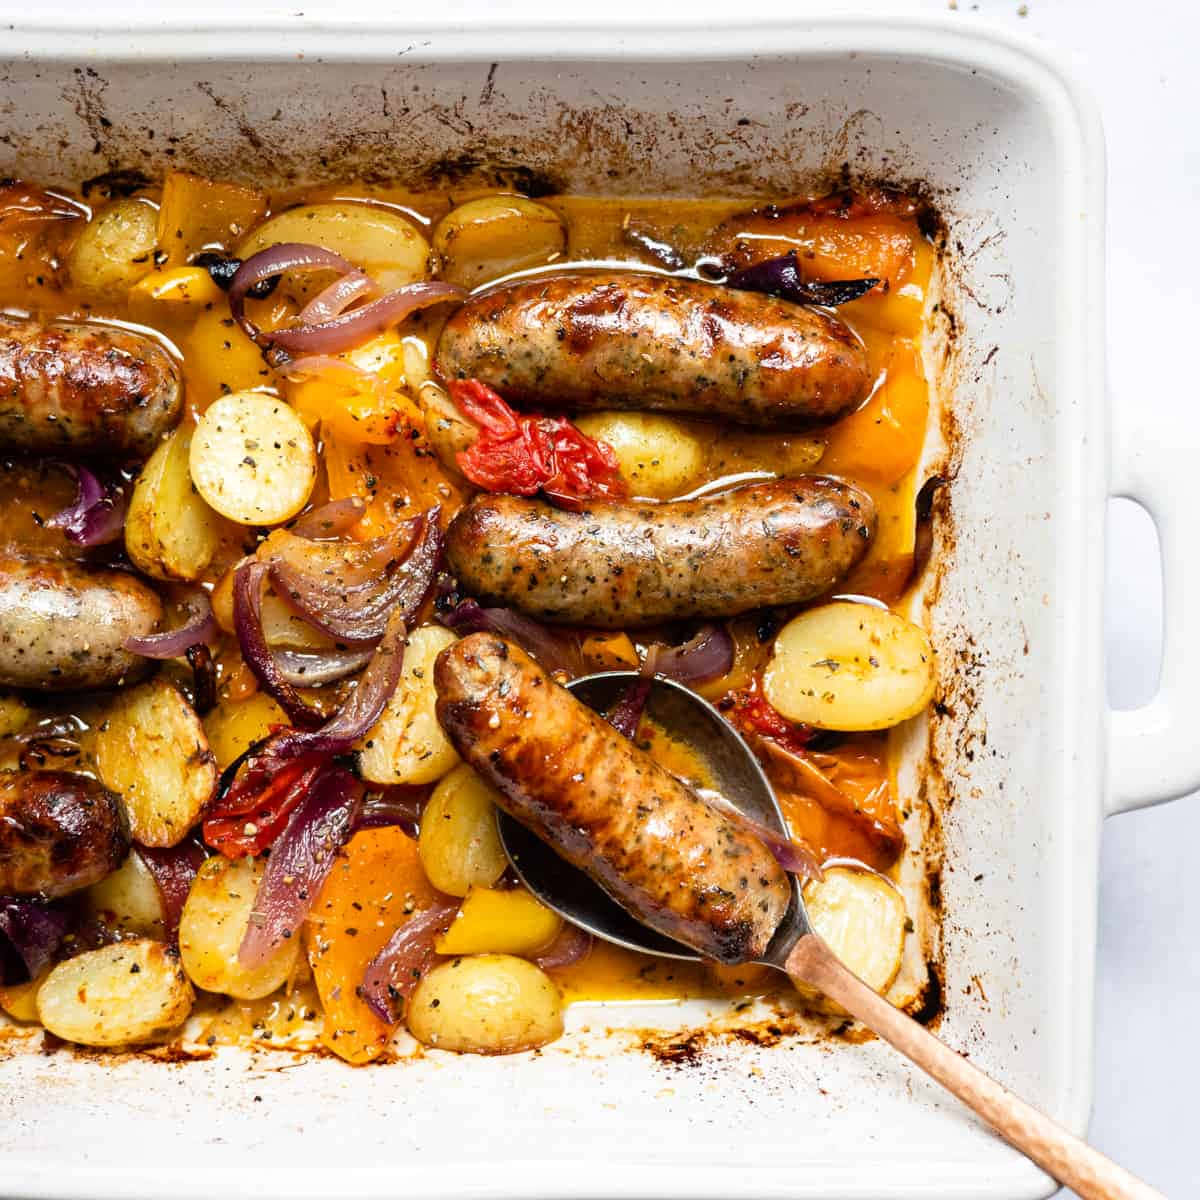 Sausages And Potatoes In A Baking Dish